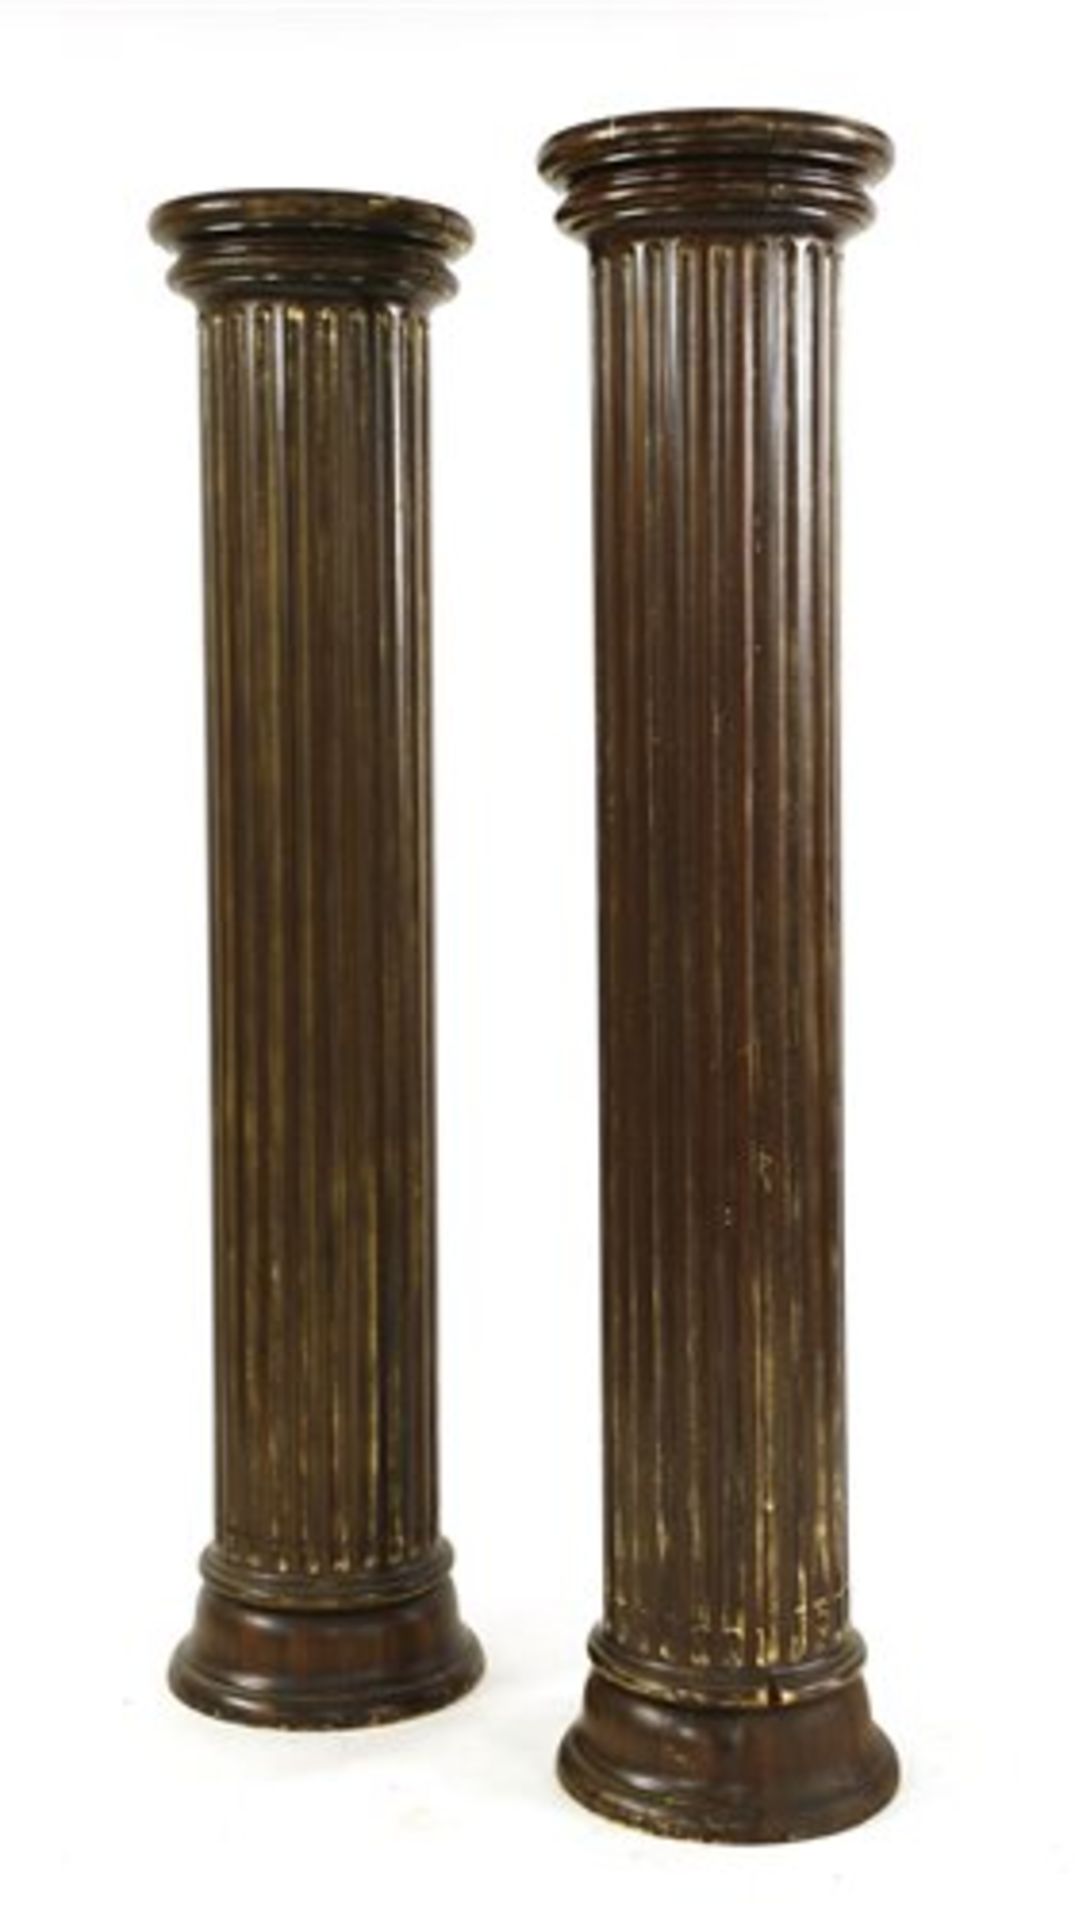 A pair of large fluted columns